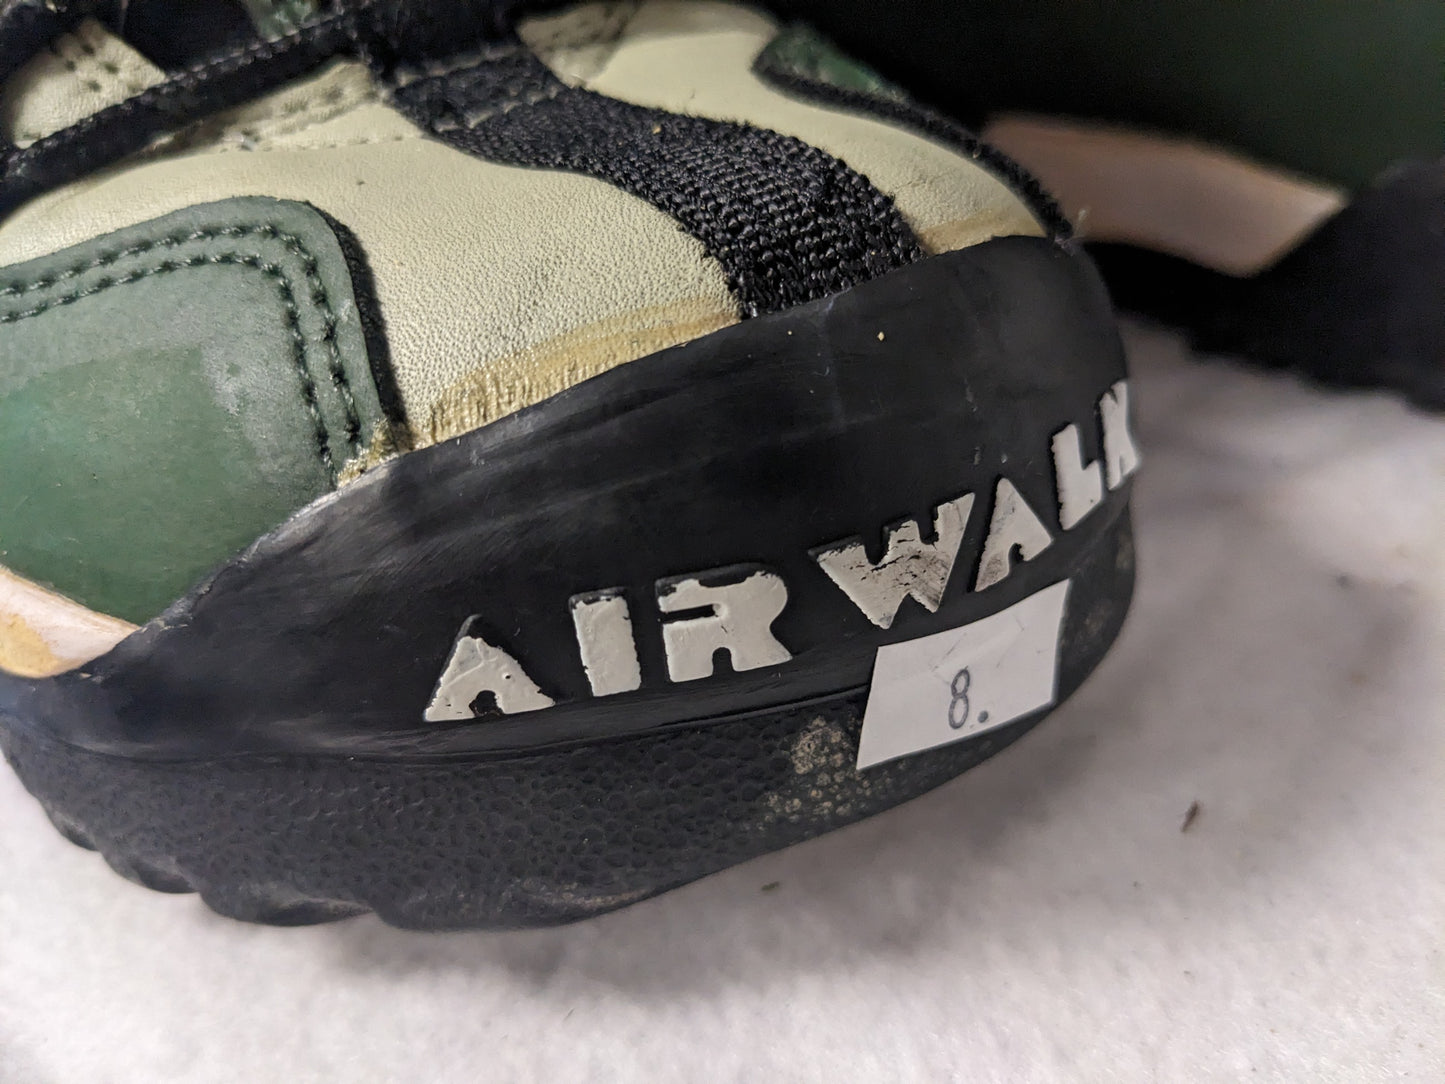 Airwalk Freeride Lace-Up Snowboard Boots Size 8 Color Green Condition Used